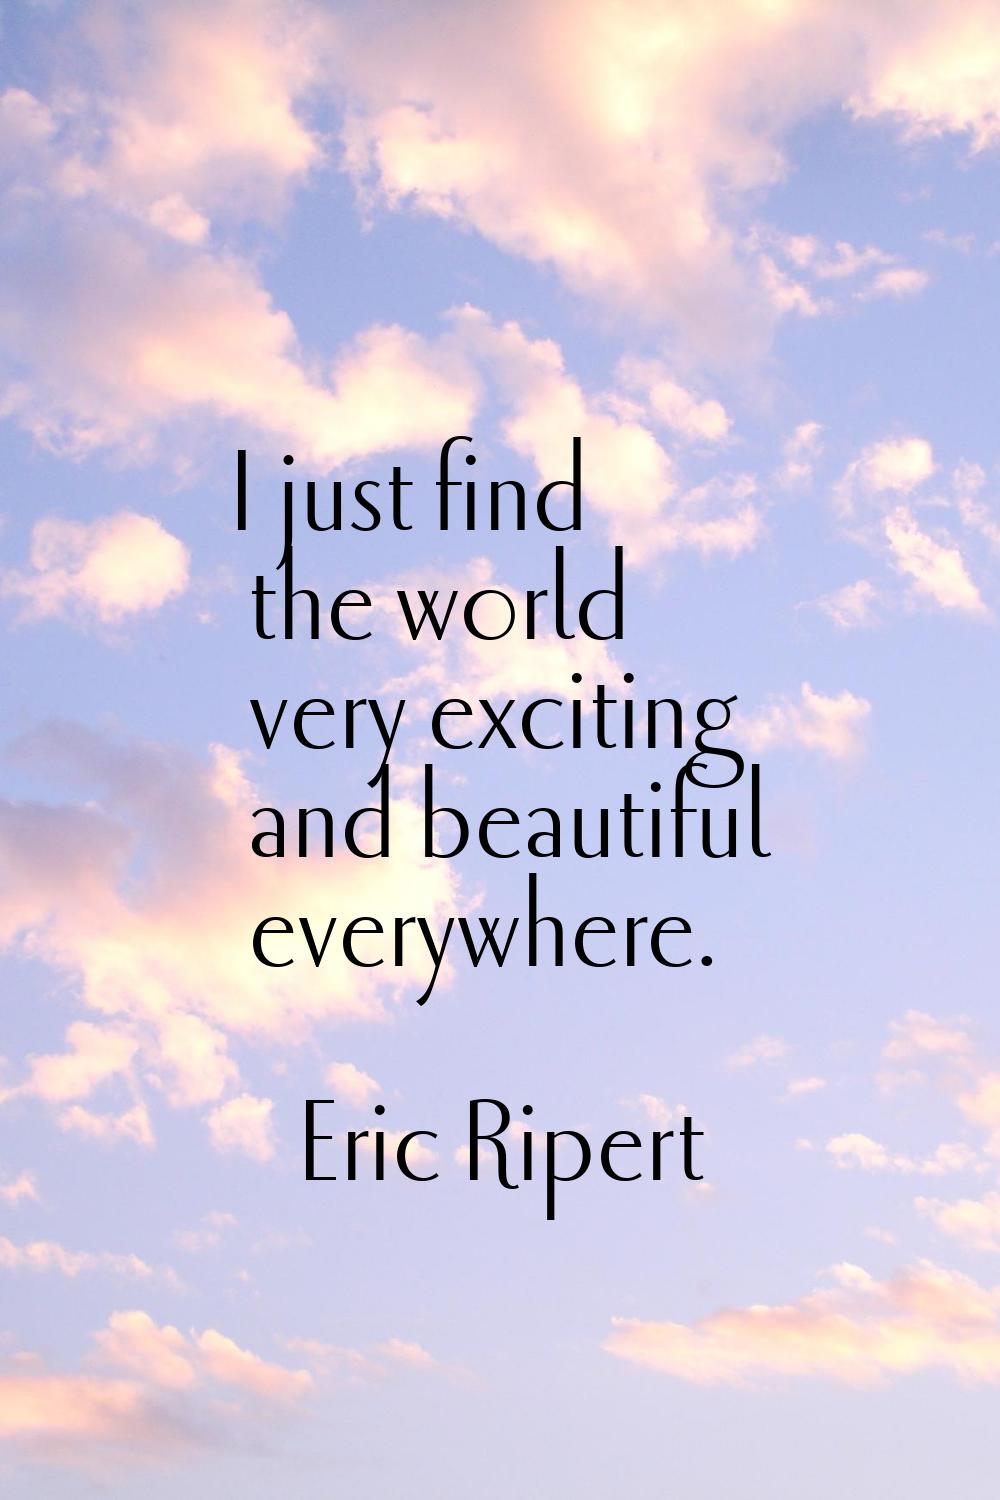 I just find the world very exciting and beautiful everywhere.